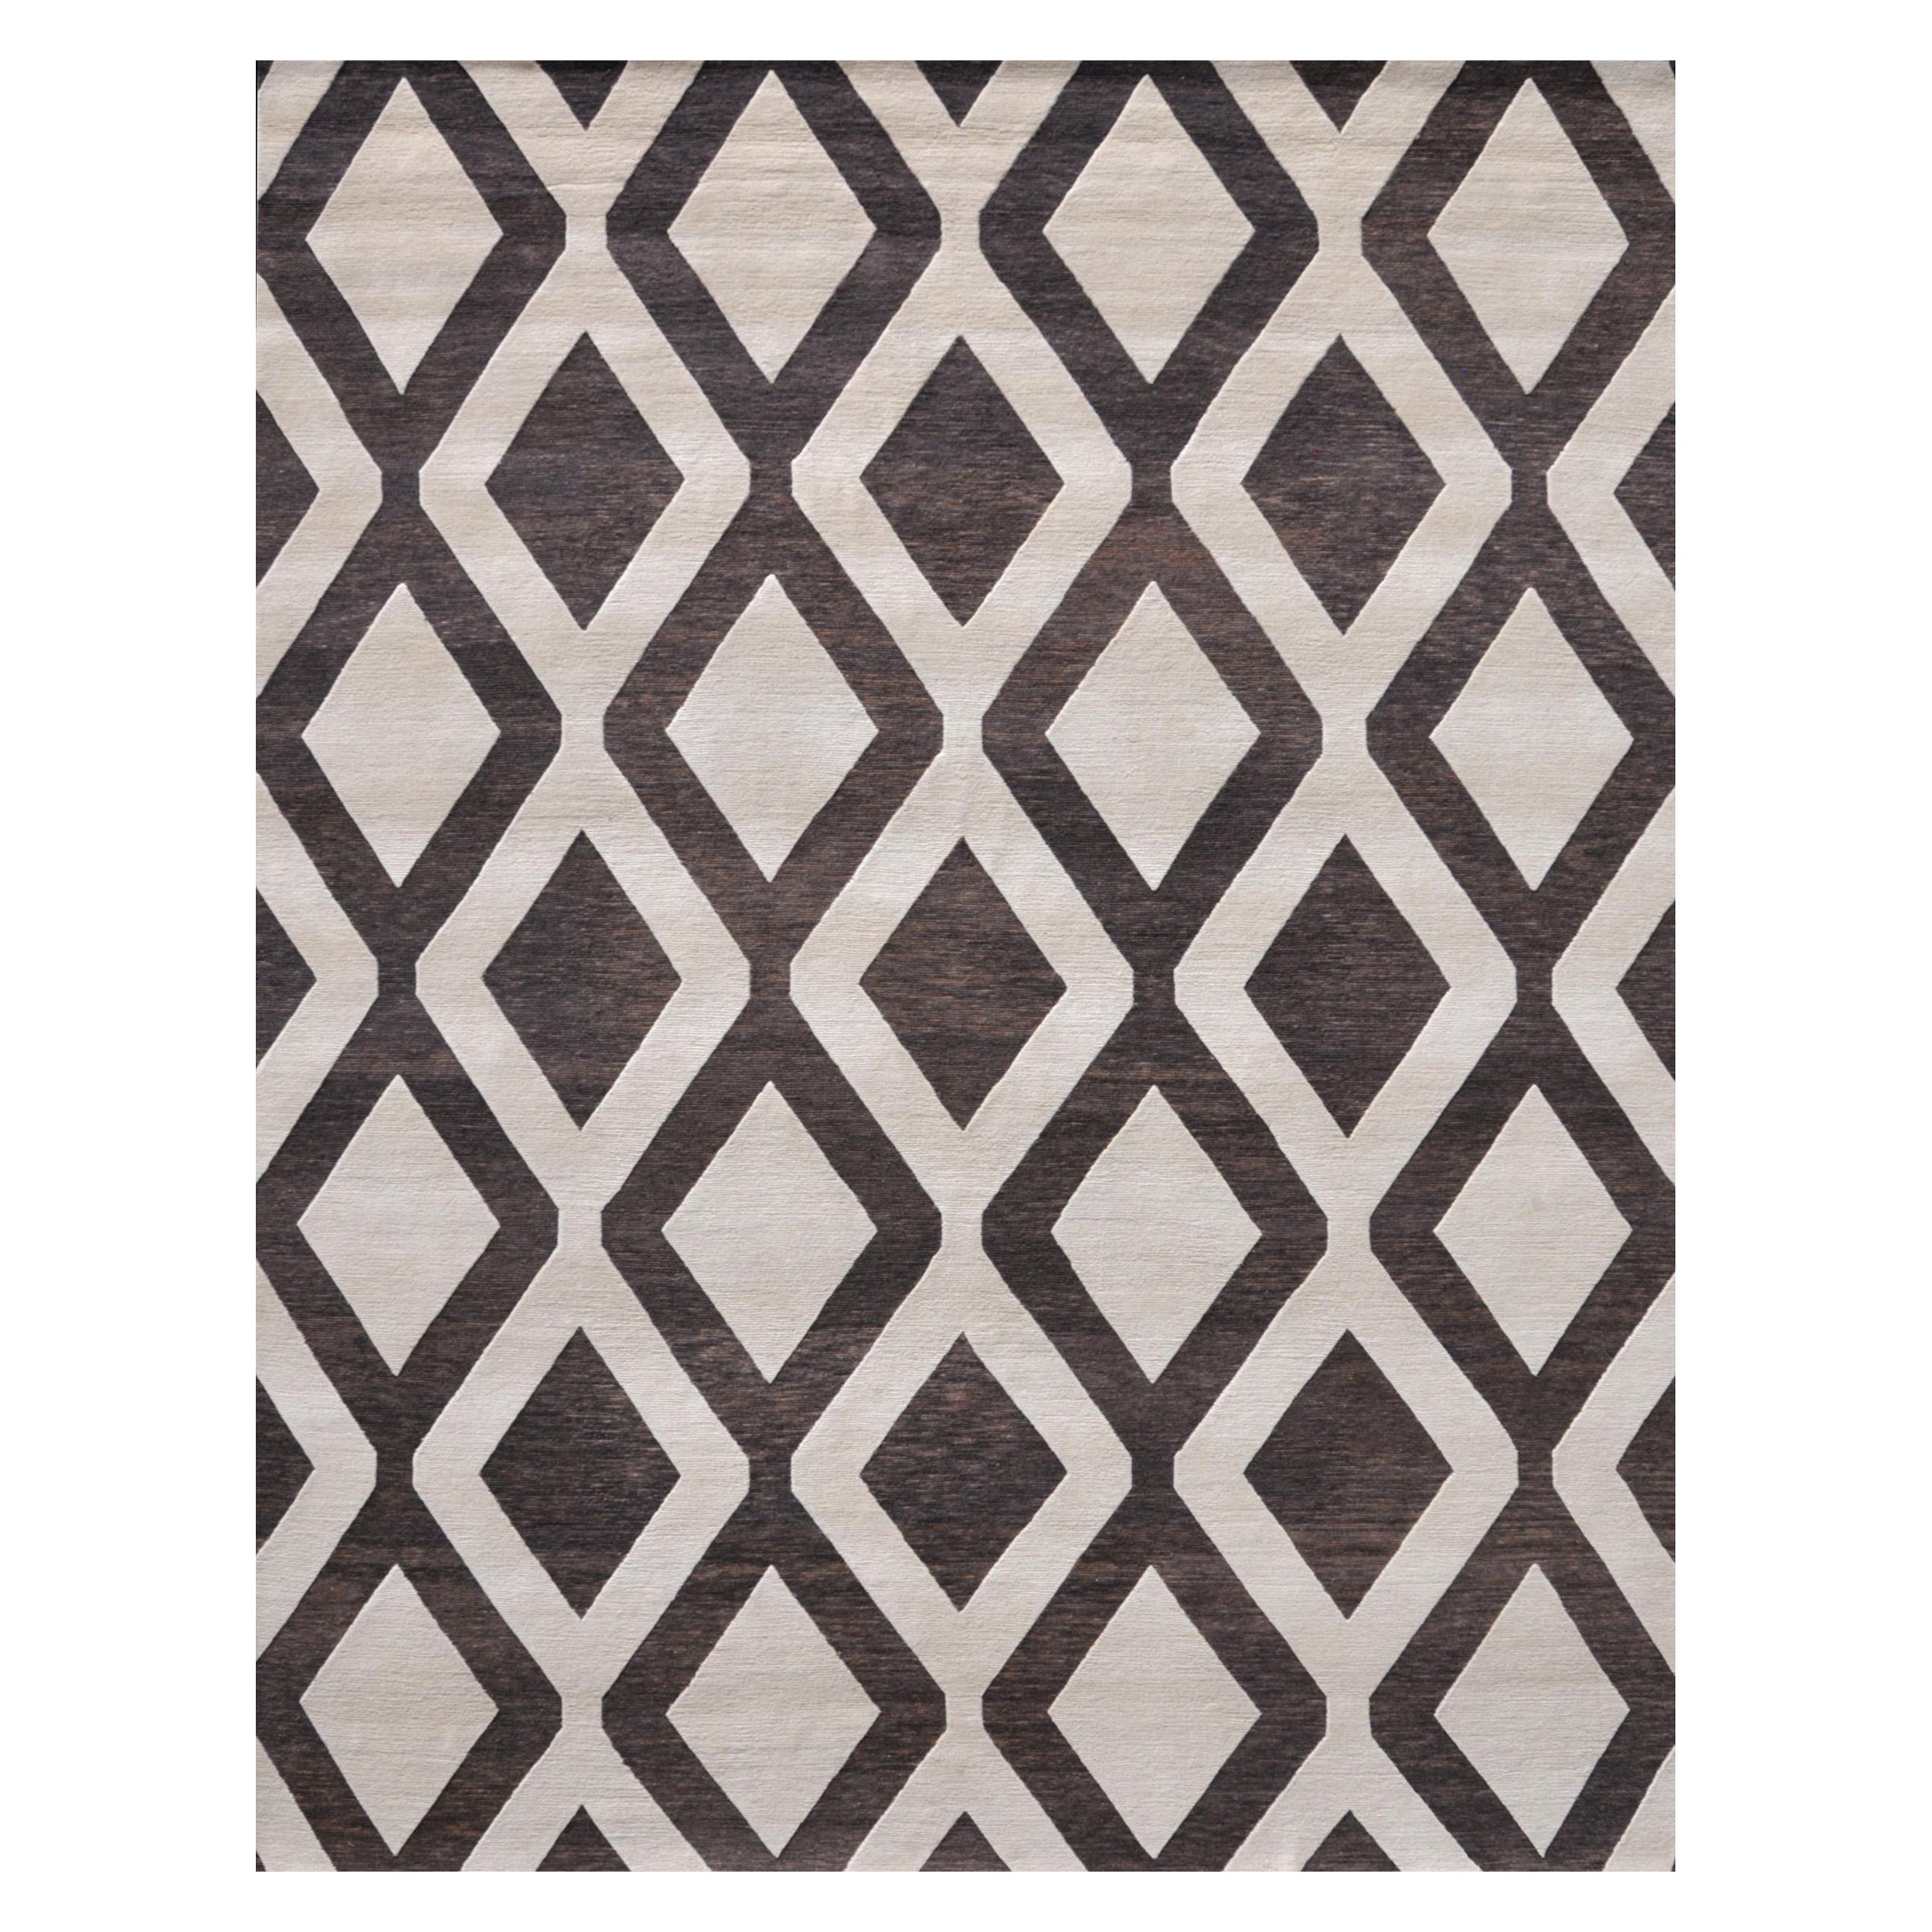 "Crossover - Brown & Cream" /  10' x 14' / Hand-Knotted Wool Rug For Sale